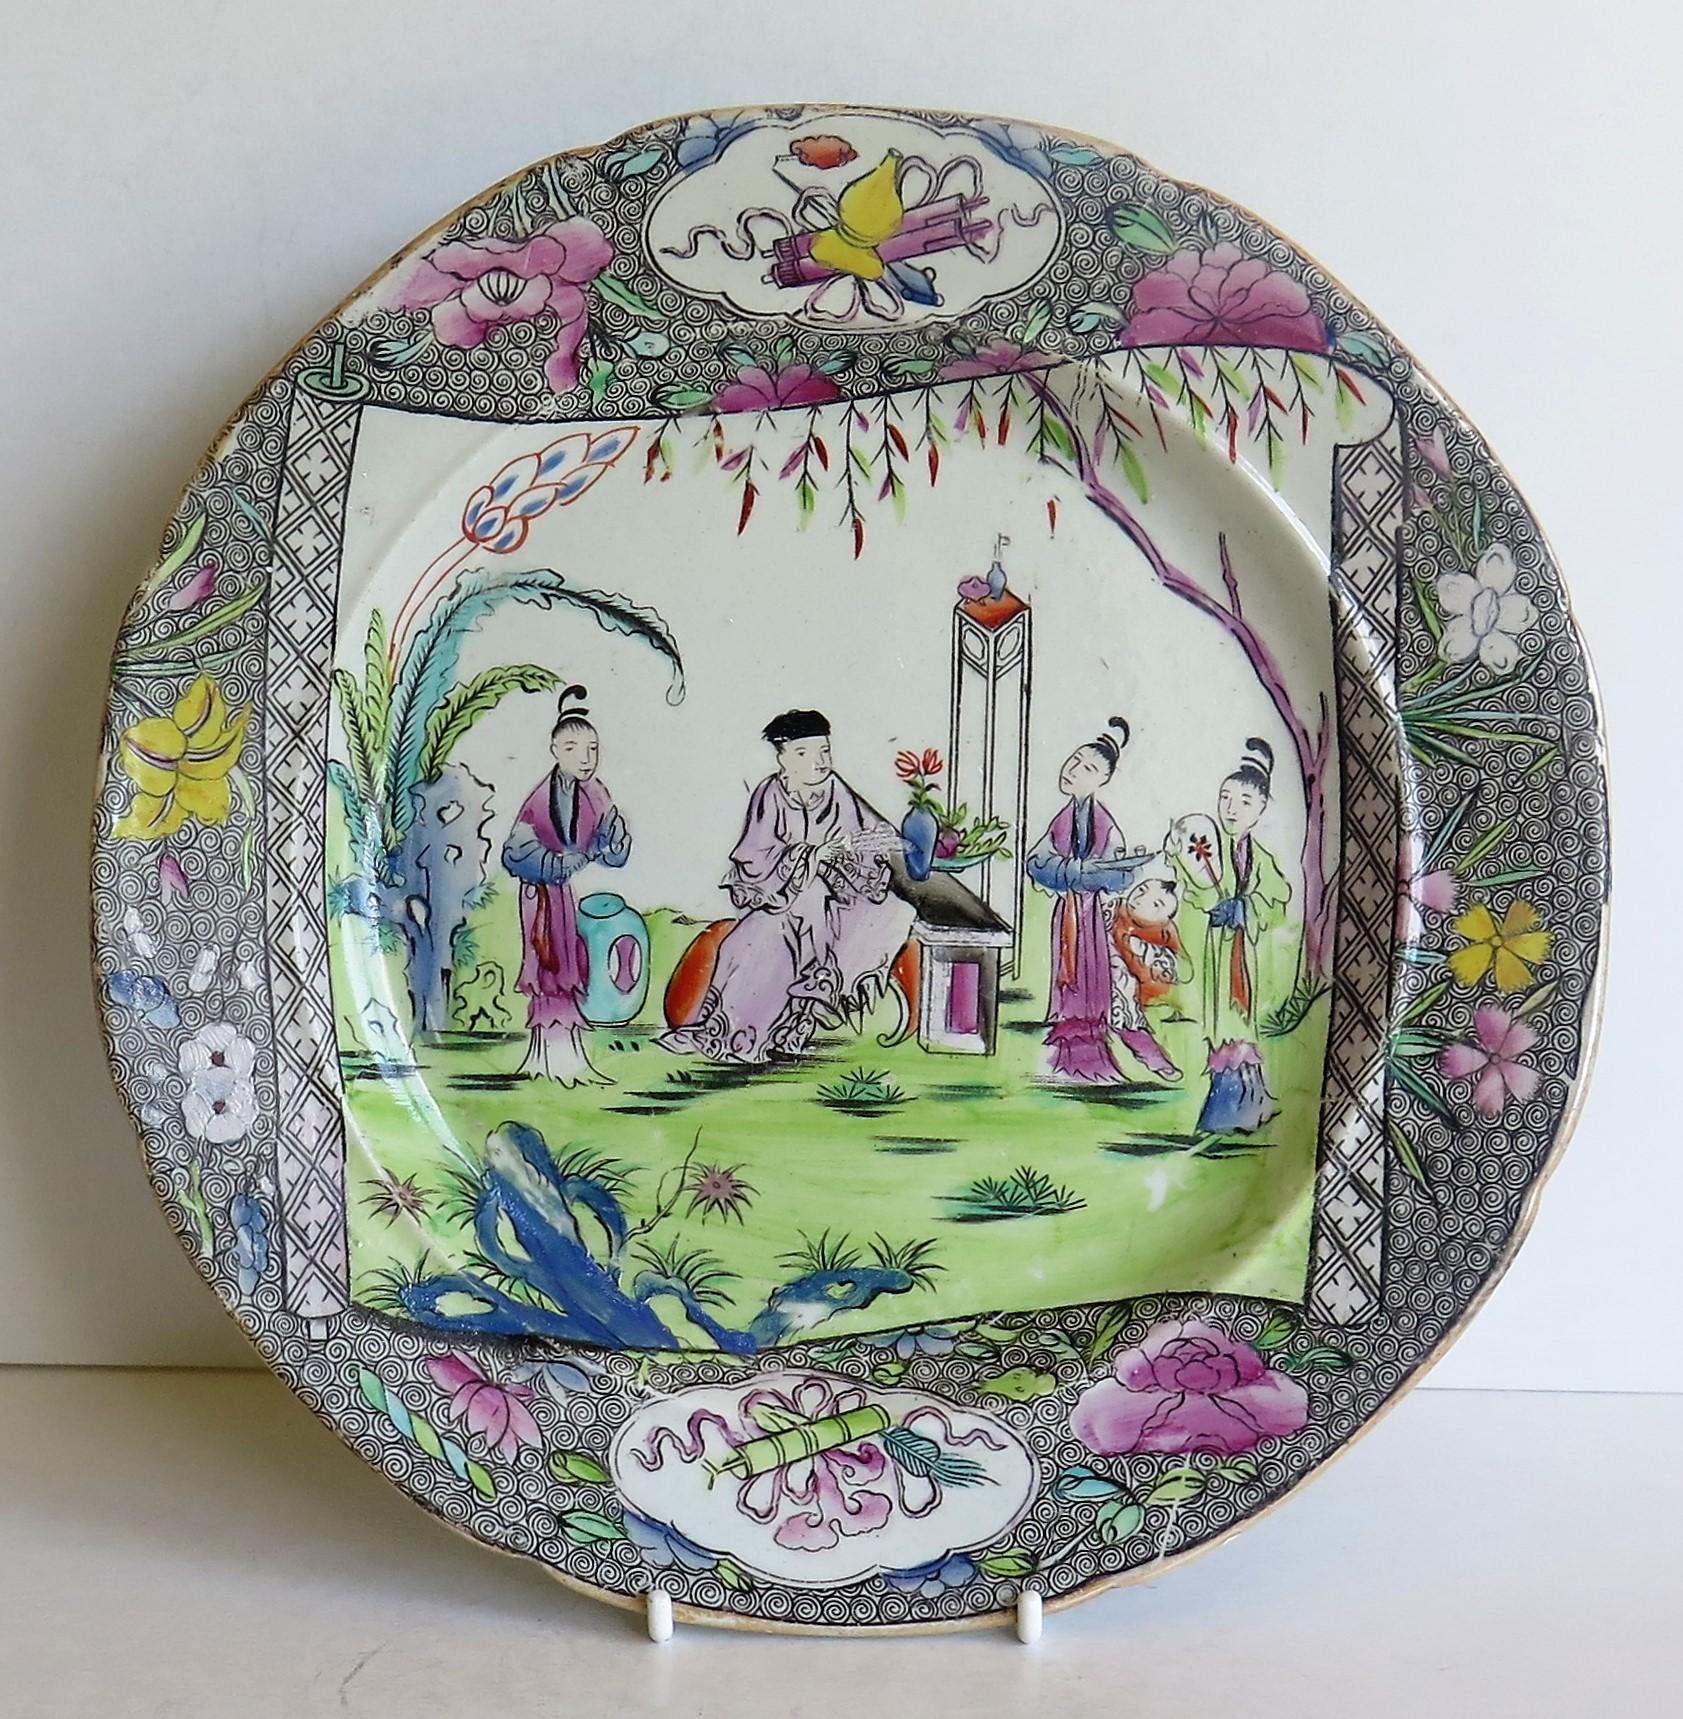 This Ironstone pottery dinner plate was made by the Mason's factory at Lane Delph, Staffordshire, England and is decorated in the Chinese Scroll Pattern, fully stamped and dating to the earliest period of Mason's Ironstone production, circa